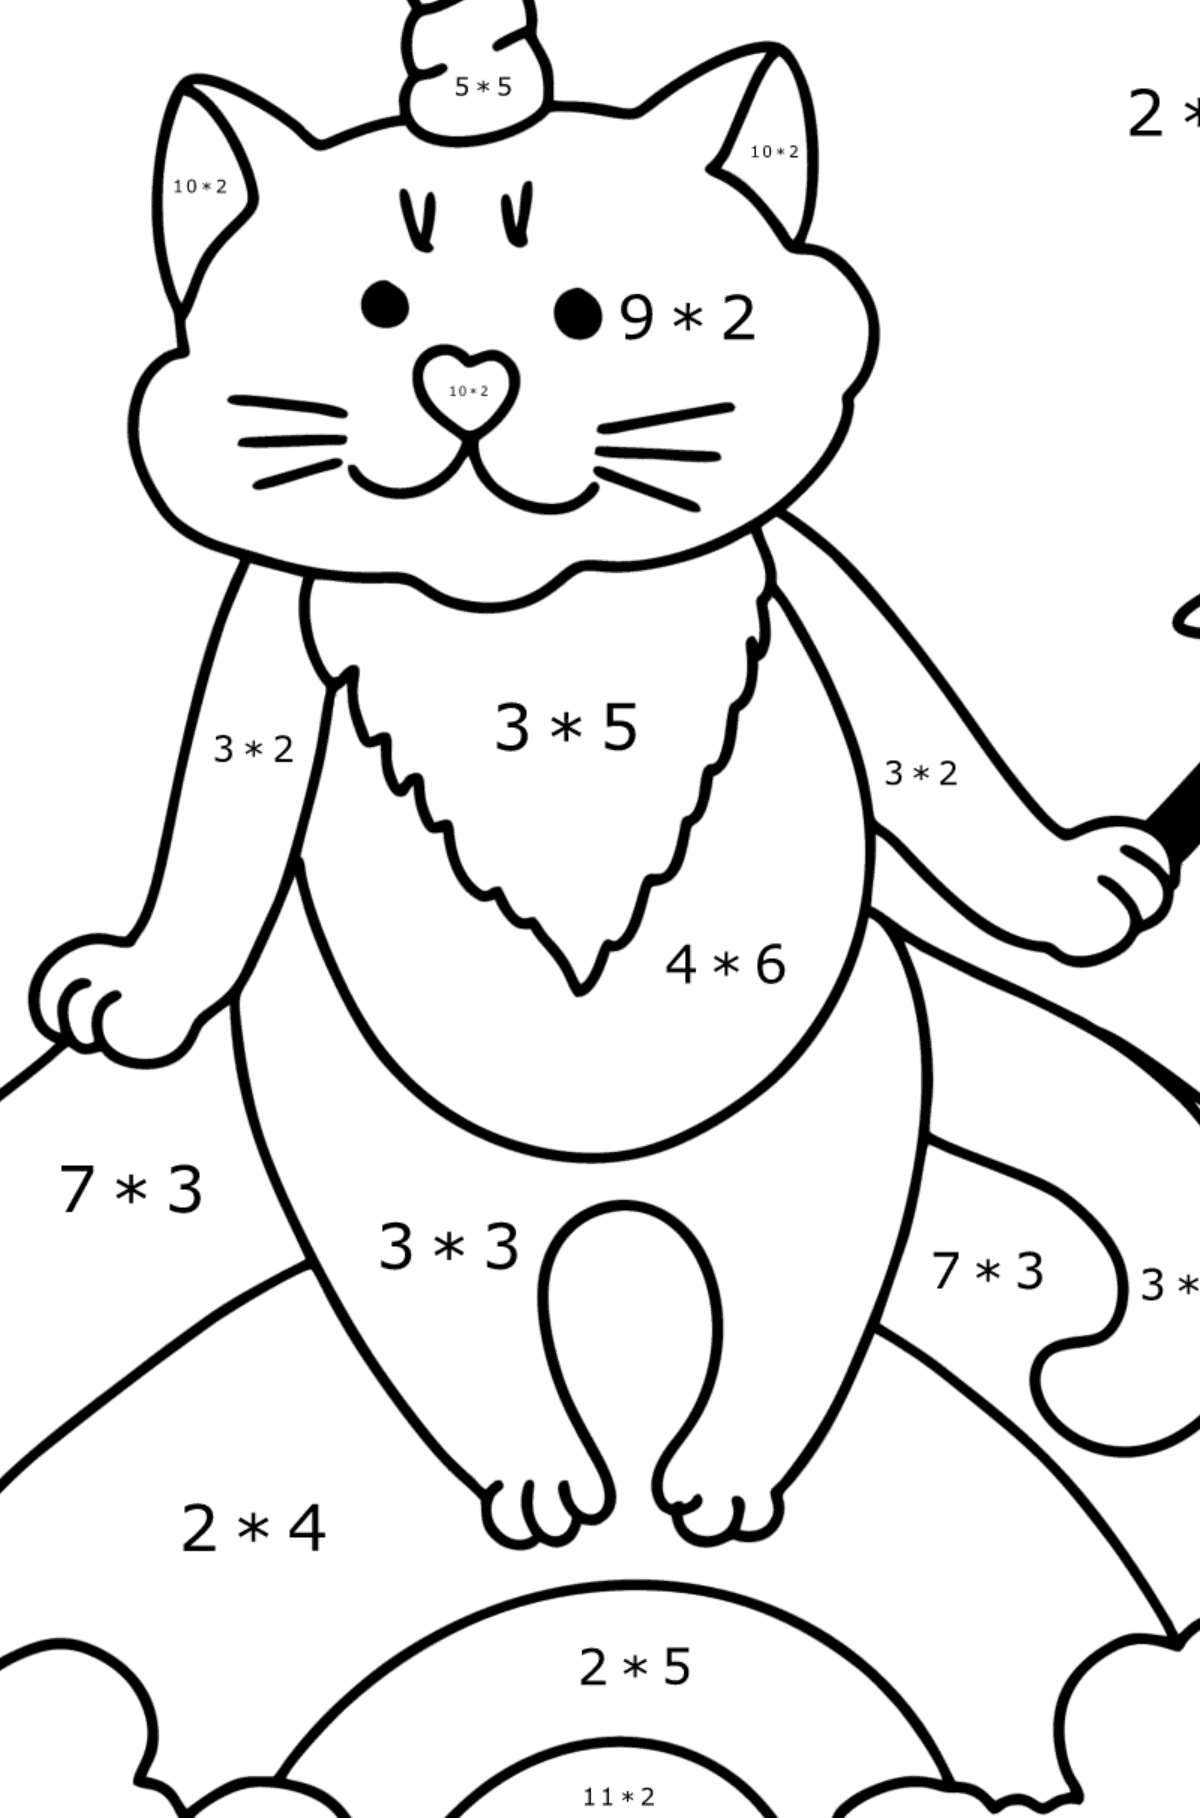 Kitten Unicorn coloring page - Math Coloring - Multiplication for Kids